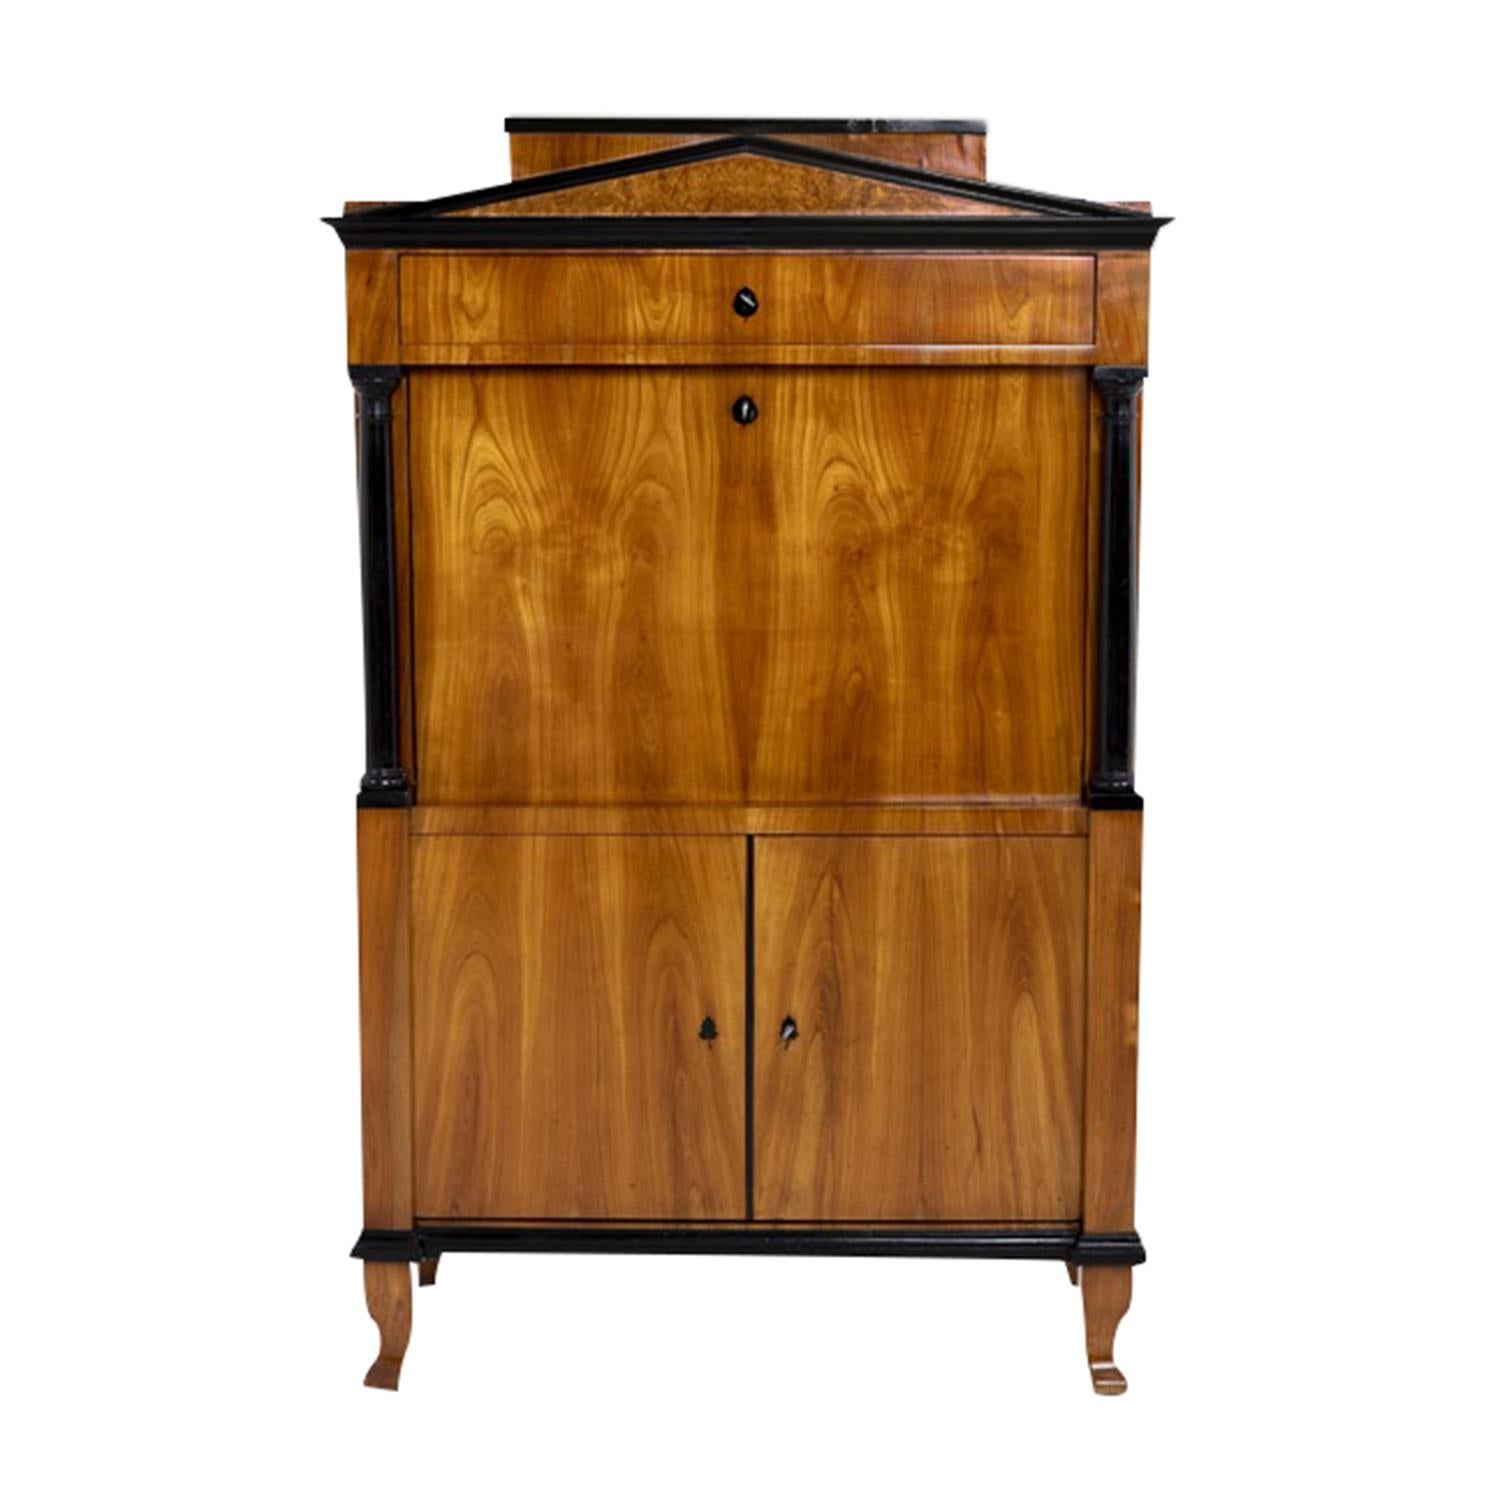 A 19th Century, antique German Biedermeier tall secretaire with a writing flap made of hand crafted shellac polished, partly veneered Cherrywood and Burlwood, in good condition. The bottom part of the detailed secretary is composed with two doors